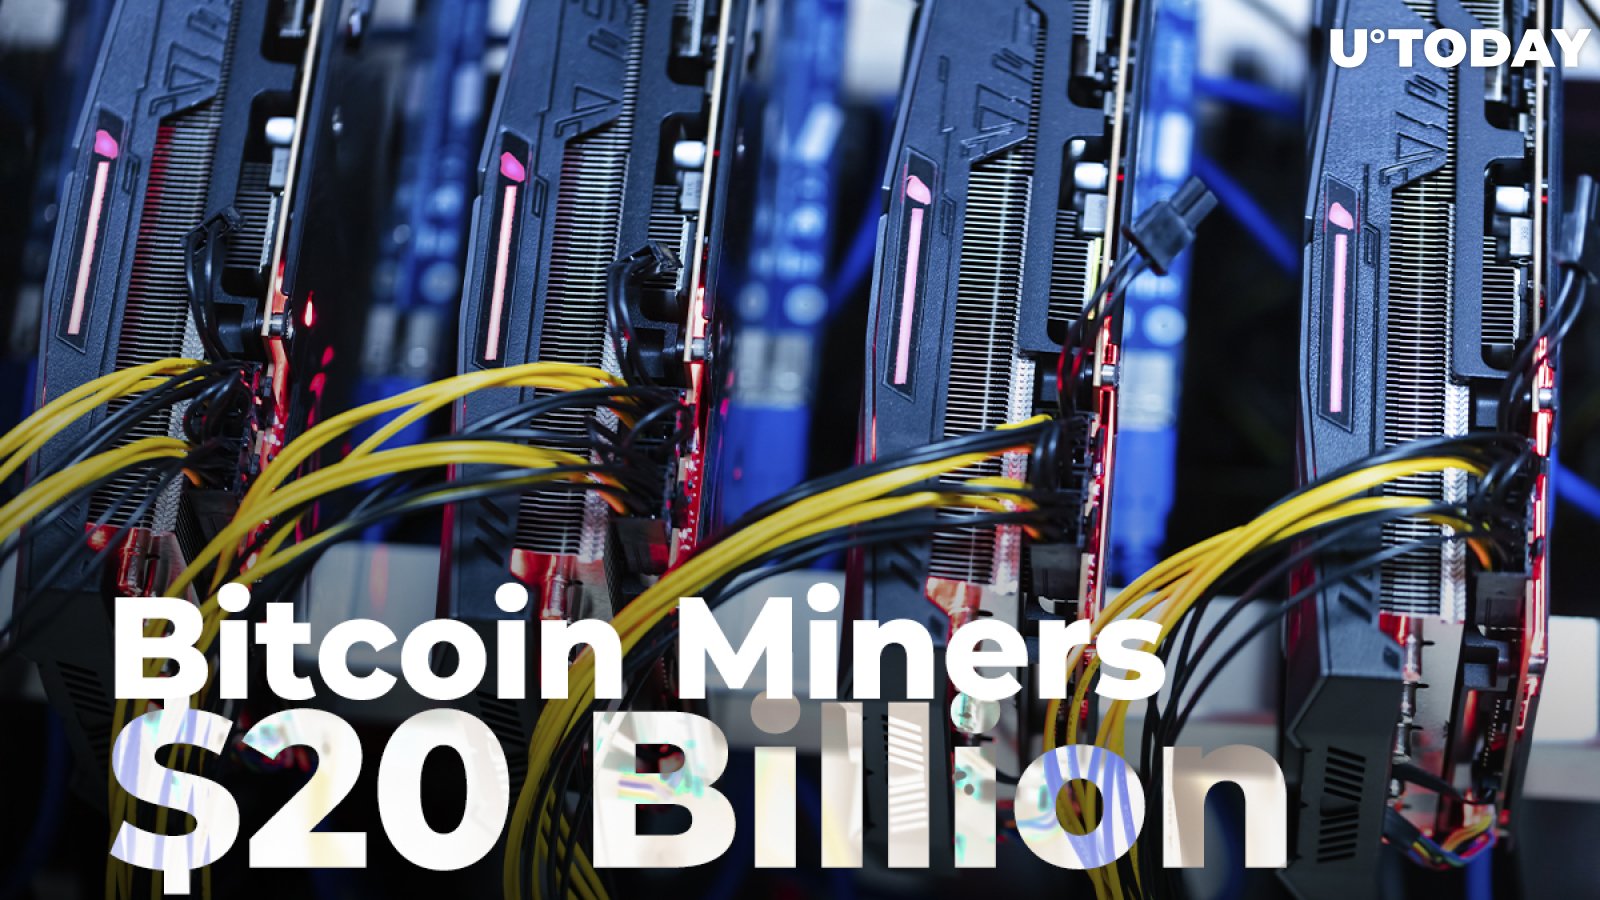 Bitcoin Miners Raked In $20 Billion to Date